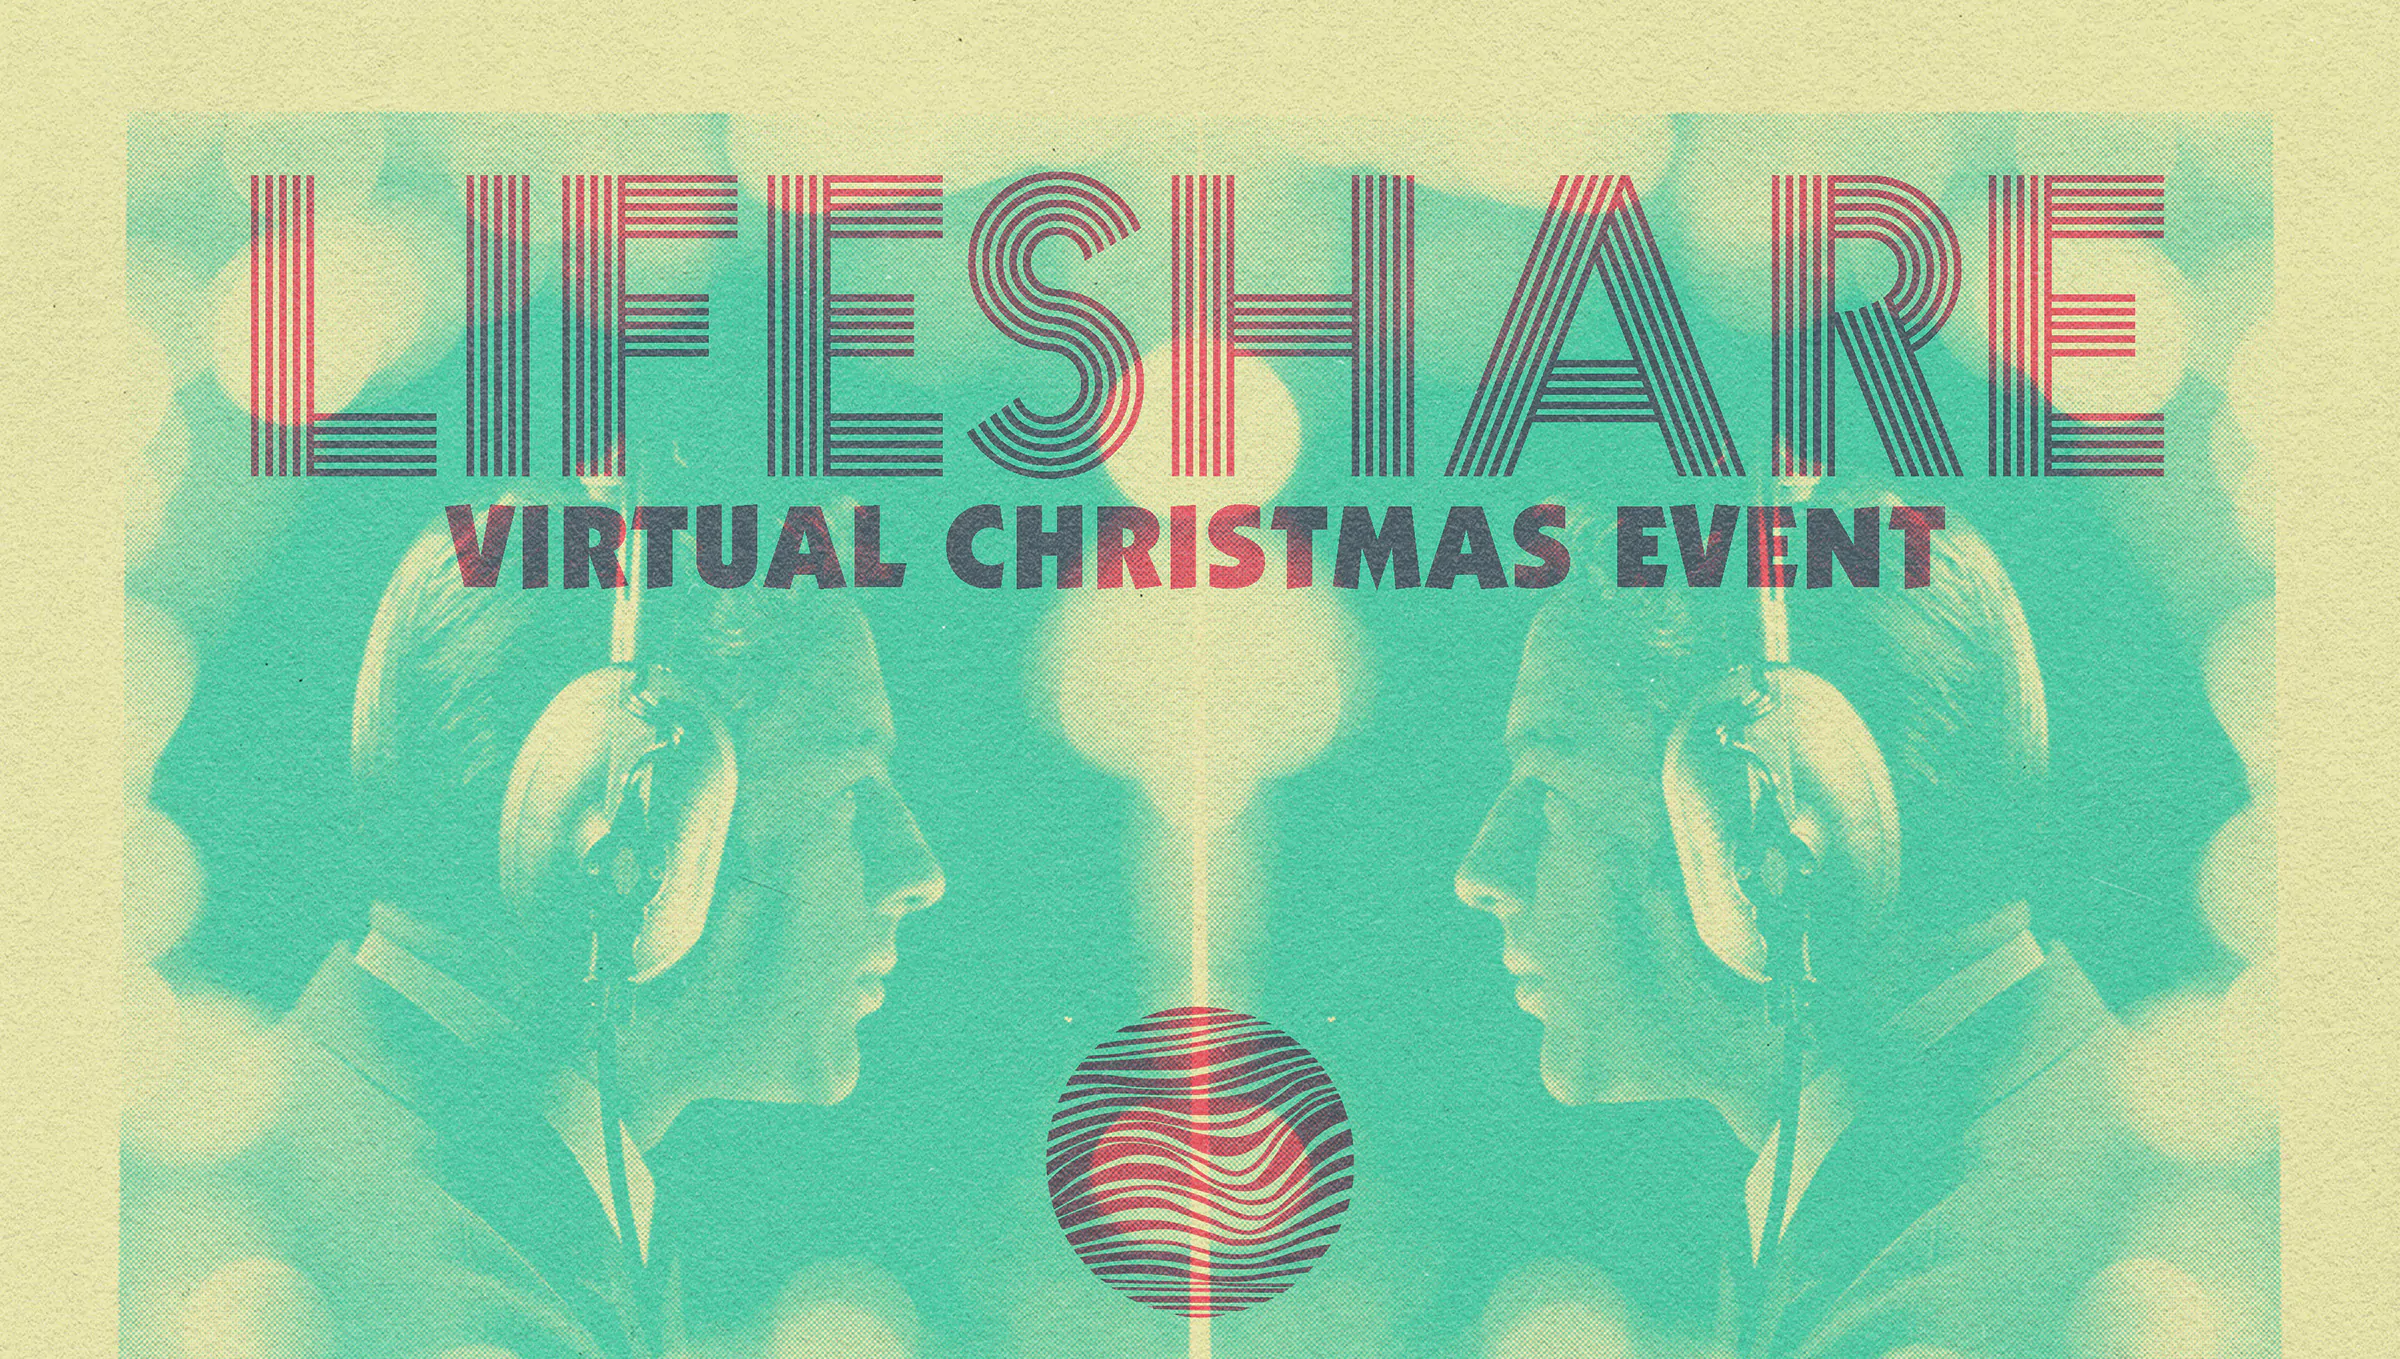 LIFESHARE announce virtual online Christmas music festival this Saturday, December 19th